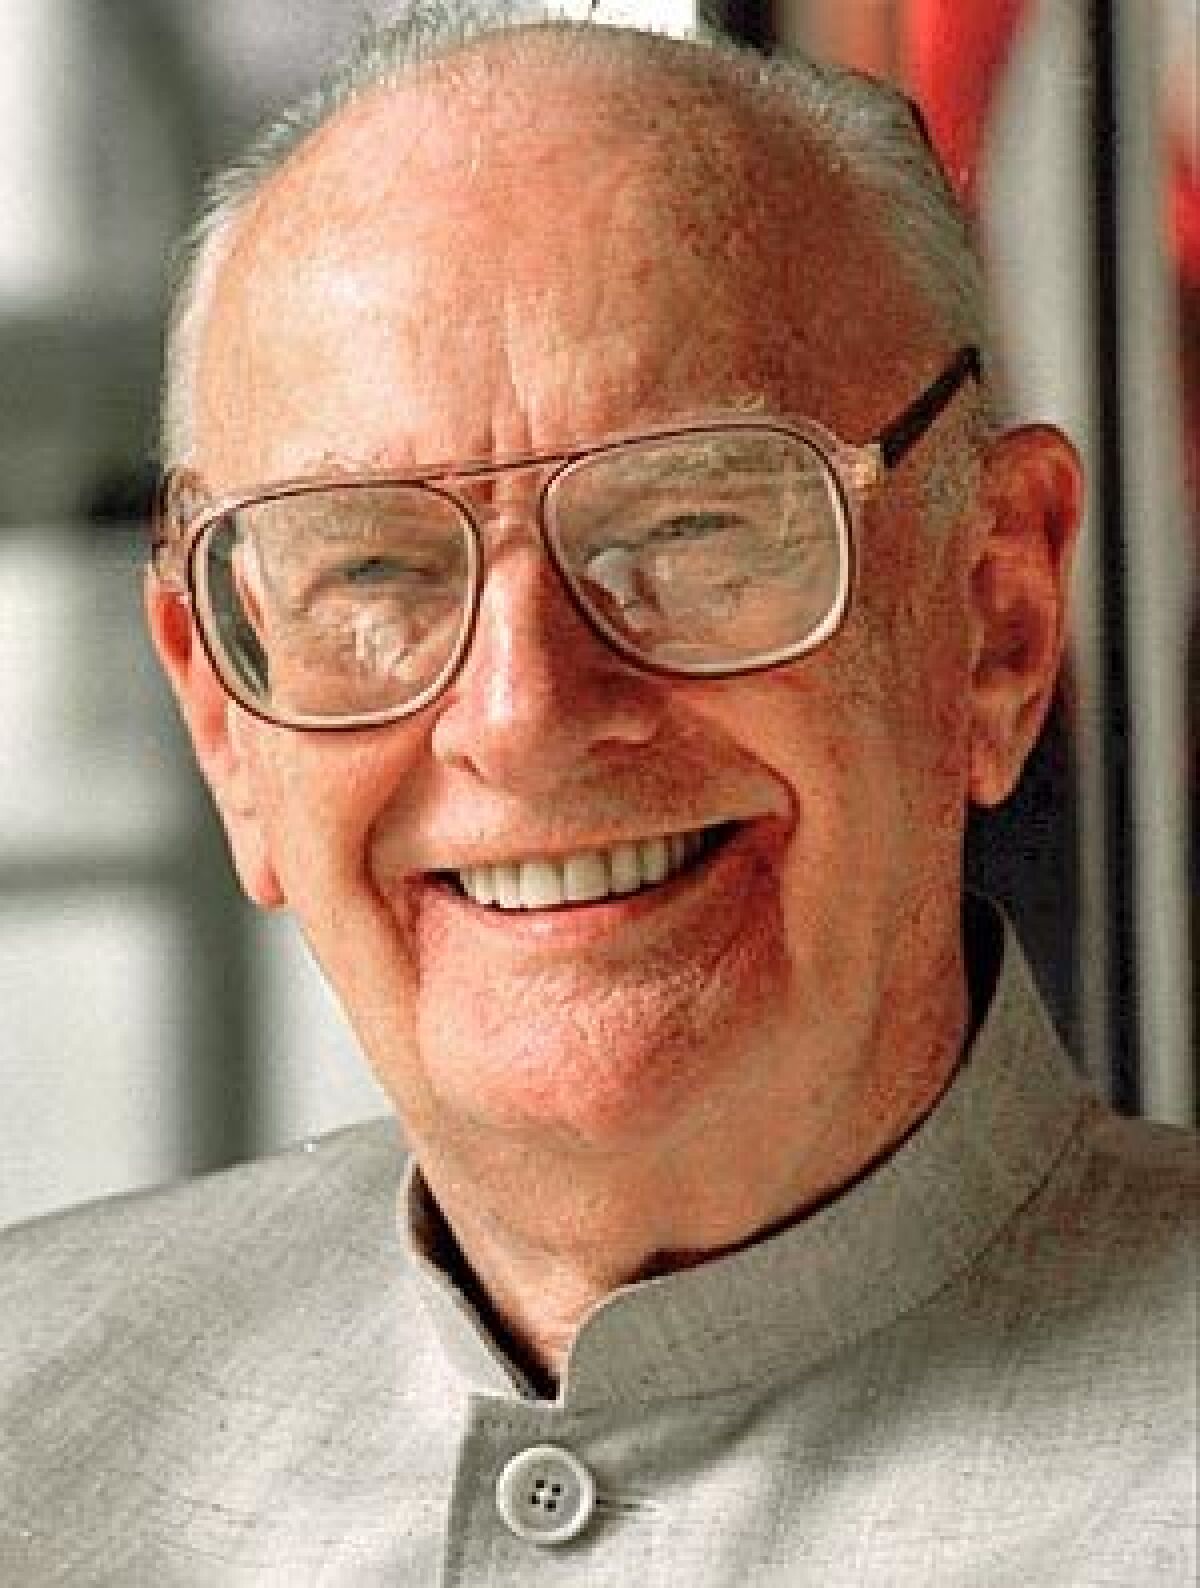 Science fiction writer Sir Arthur C. Clarke, best known for "2001: A Space Odyssey," was a prolific and best-selling author for four decades with an uncanny ability to predict the impact of technology.